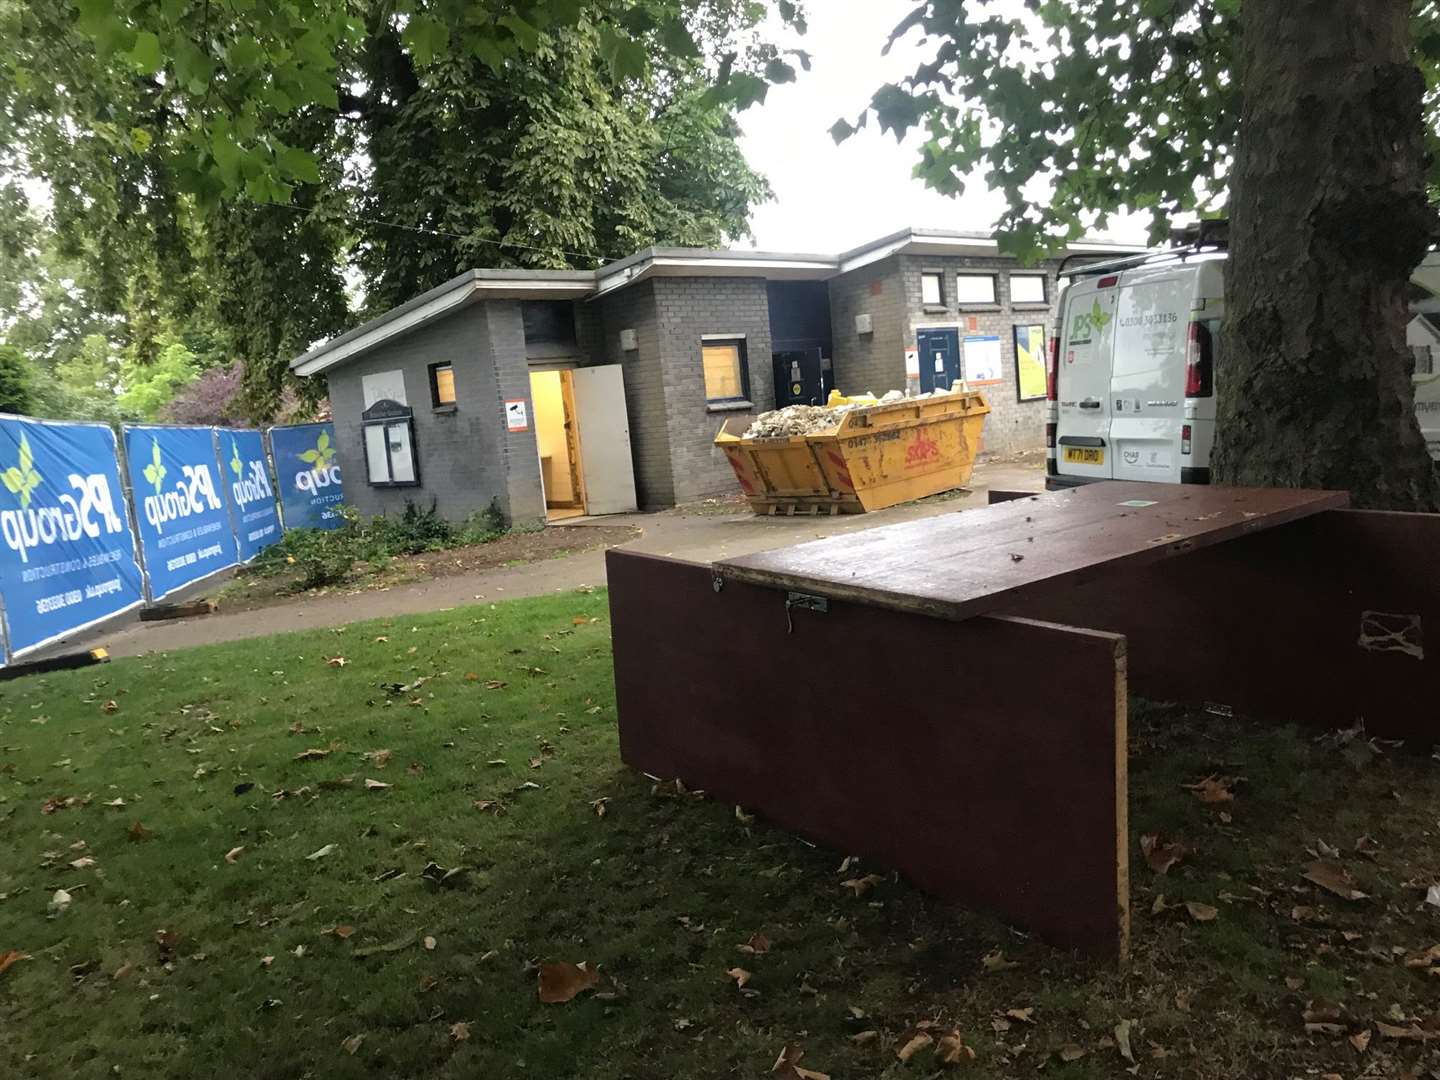 Work has started to convert the toilets